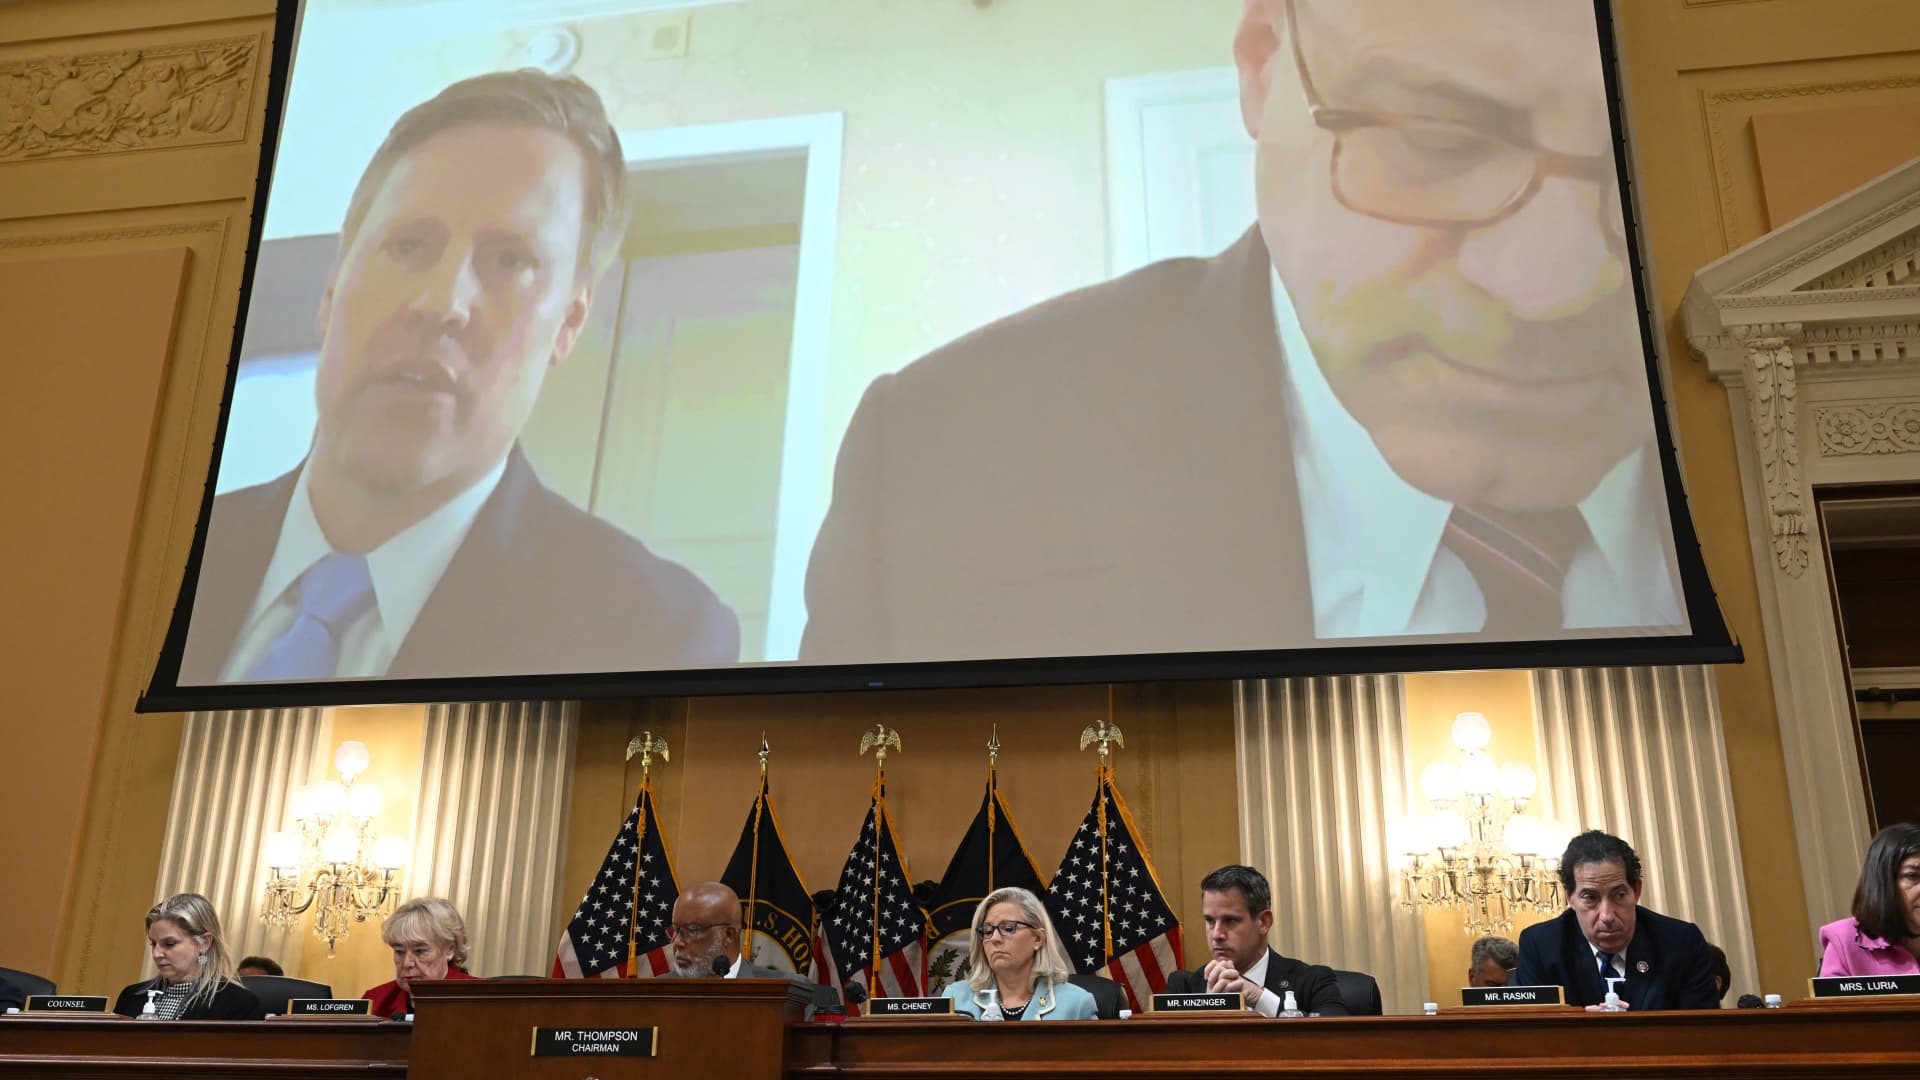 Video from an interview with former President Trump campaign manager William Stepien (L), and his attorney Kevin Marino, is played during a hearing by the Select Committee to Investigate the January 6th Attack on the US Capitol in the Cannon House Office Building on June 13, 2022 in Washington, DC.